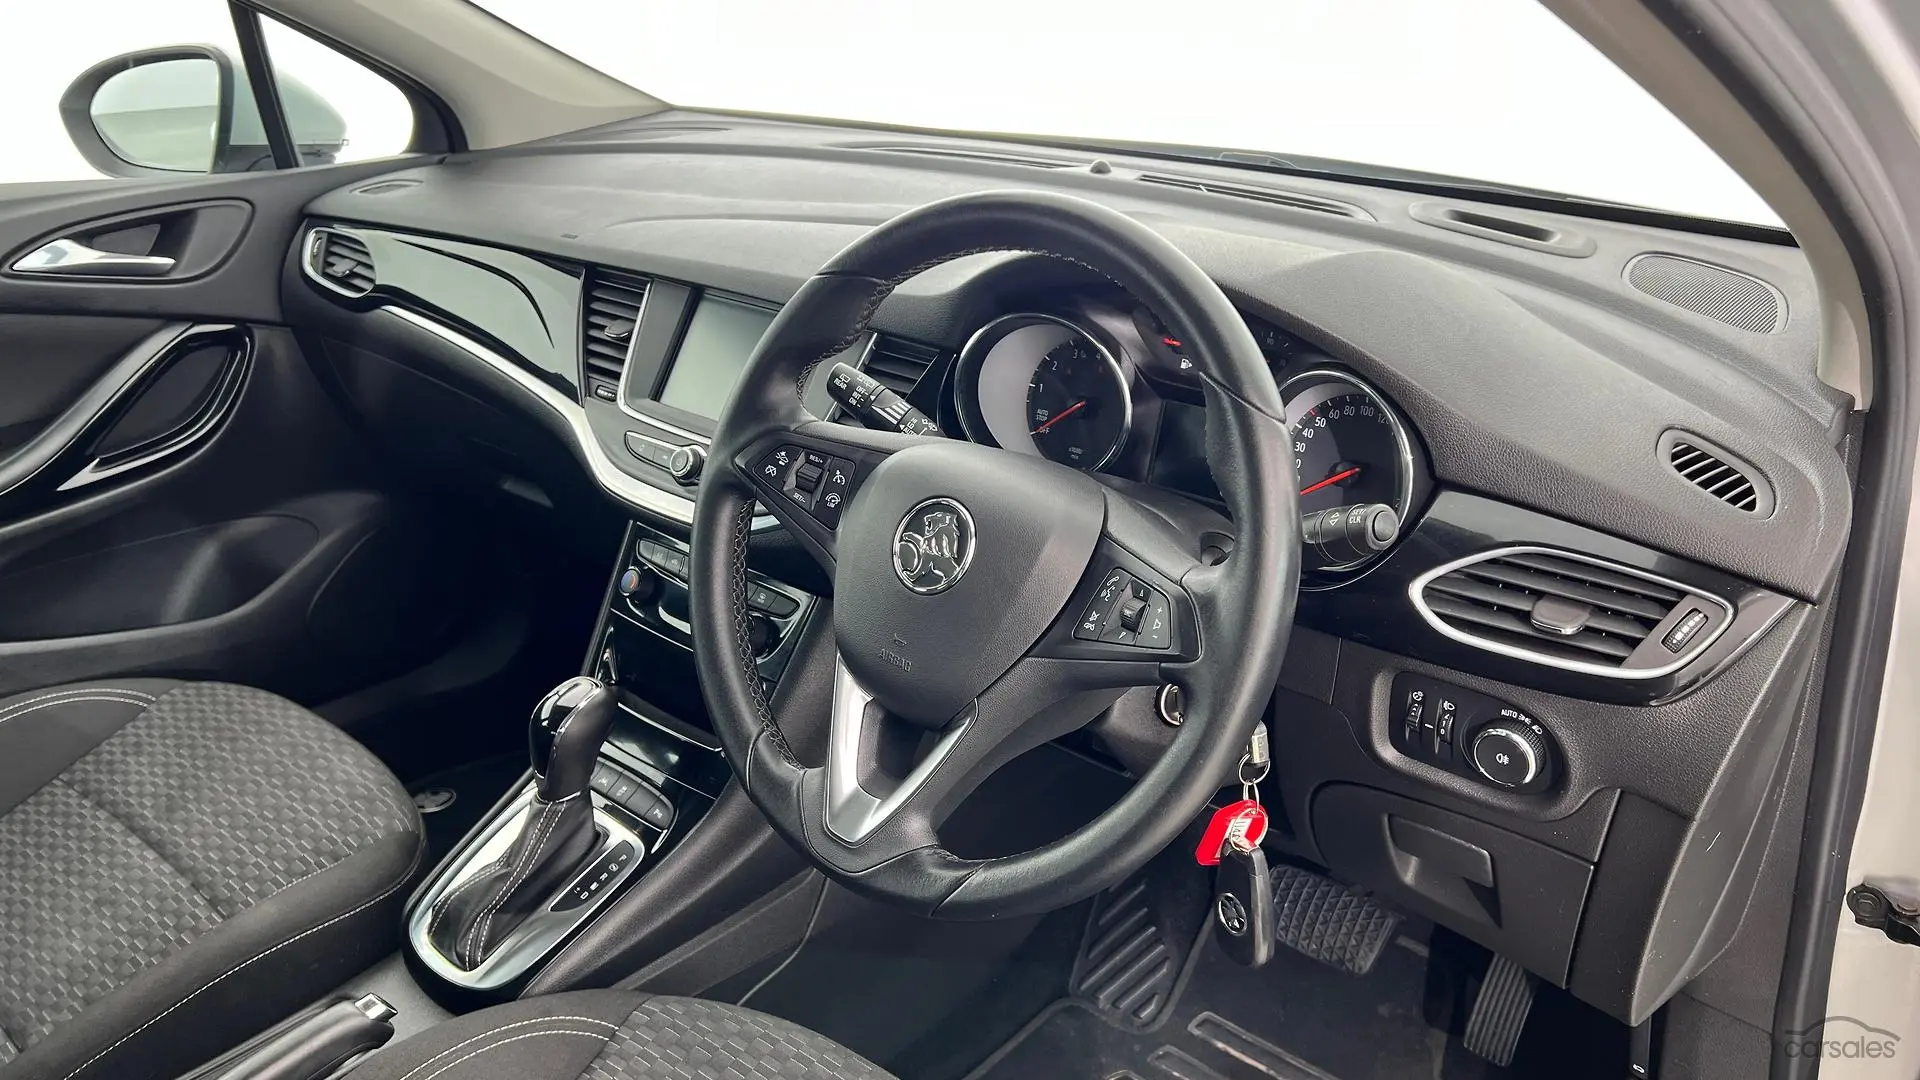 2017 Holden Astra Image 13